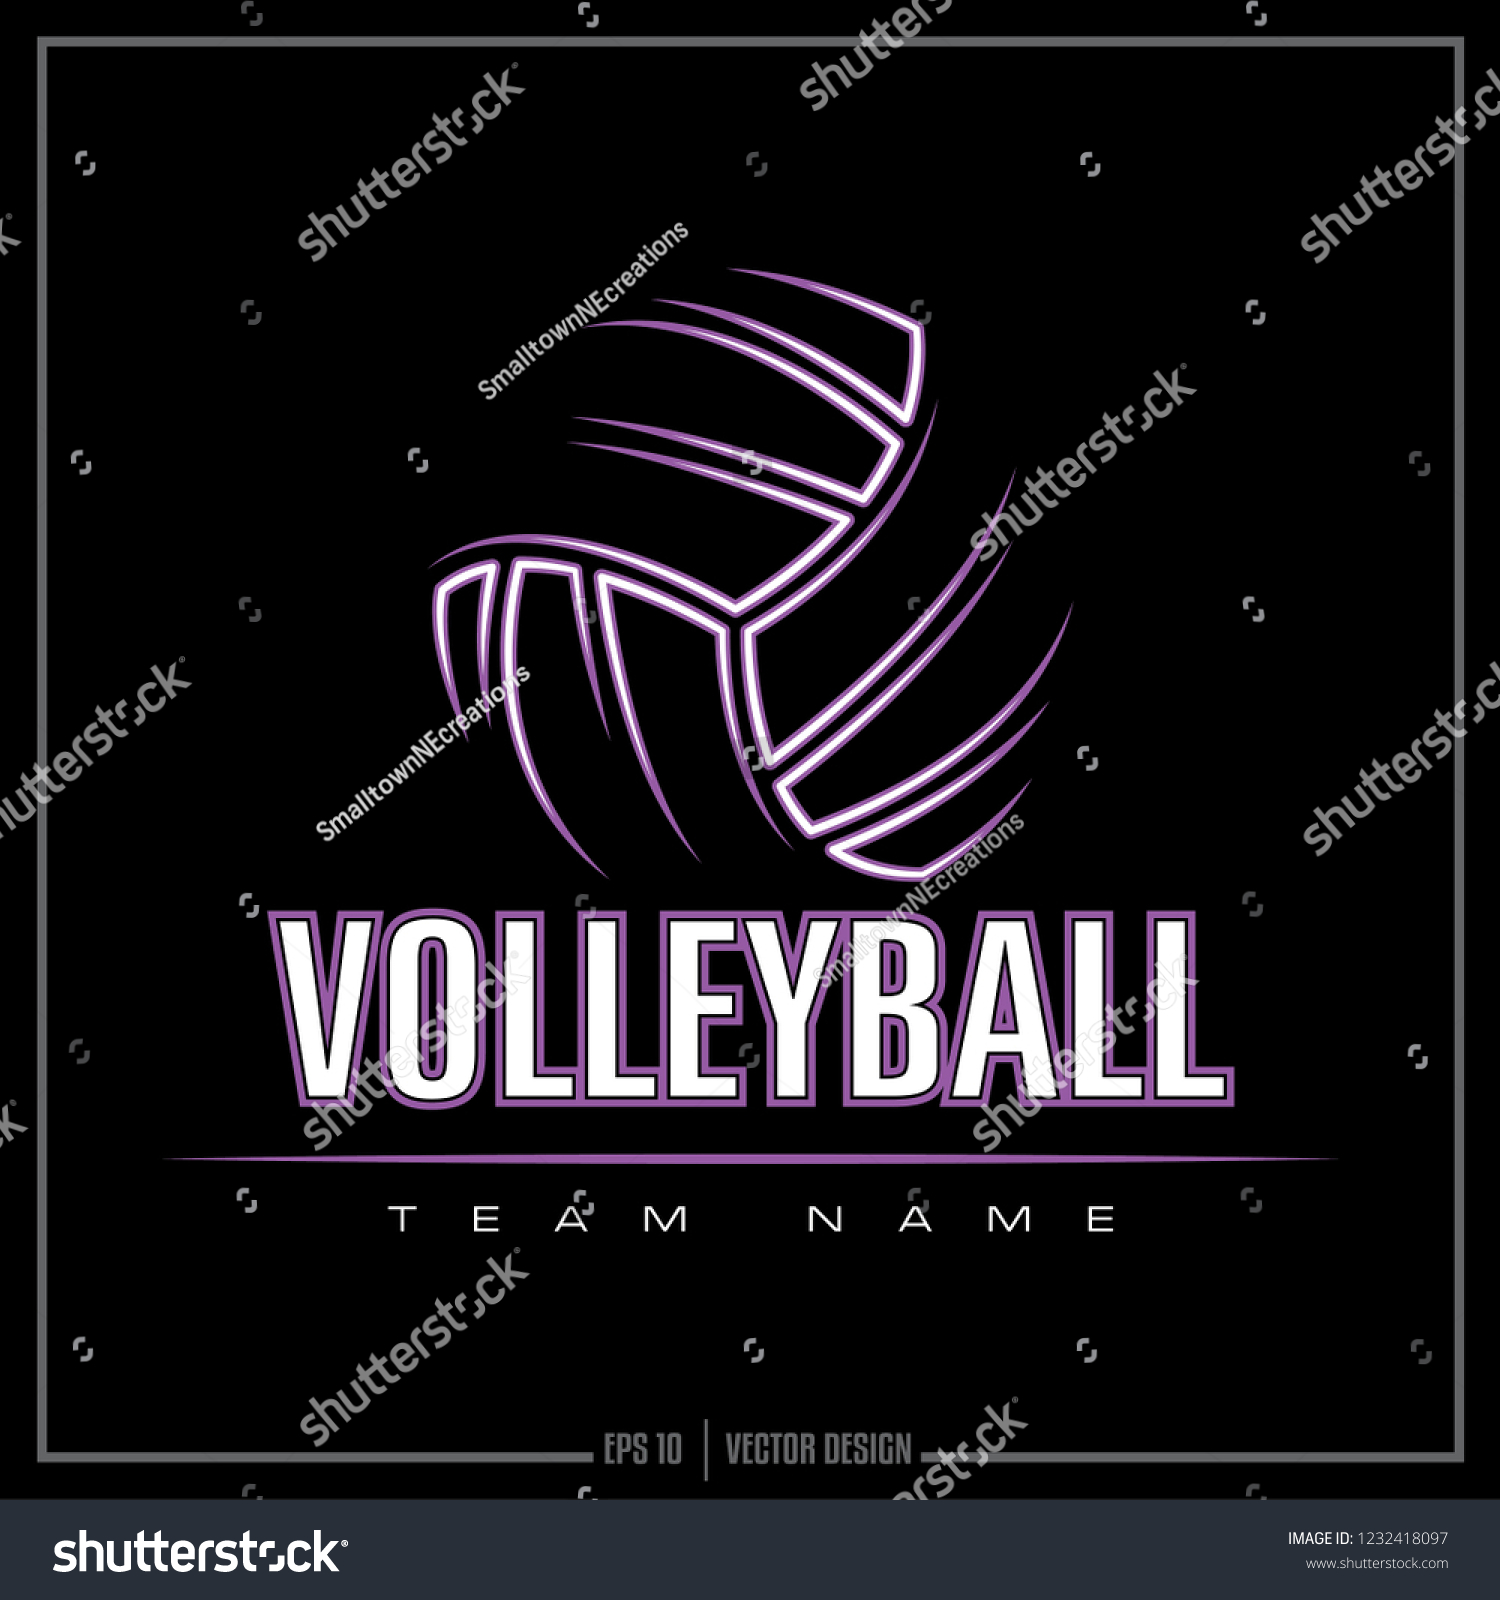 15,818 Volleyball logo Images, Stock Photos & Vectors | Shutterstock